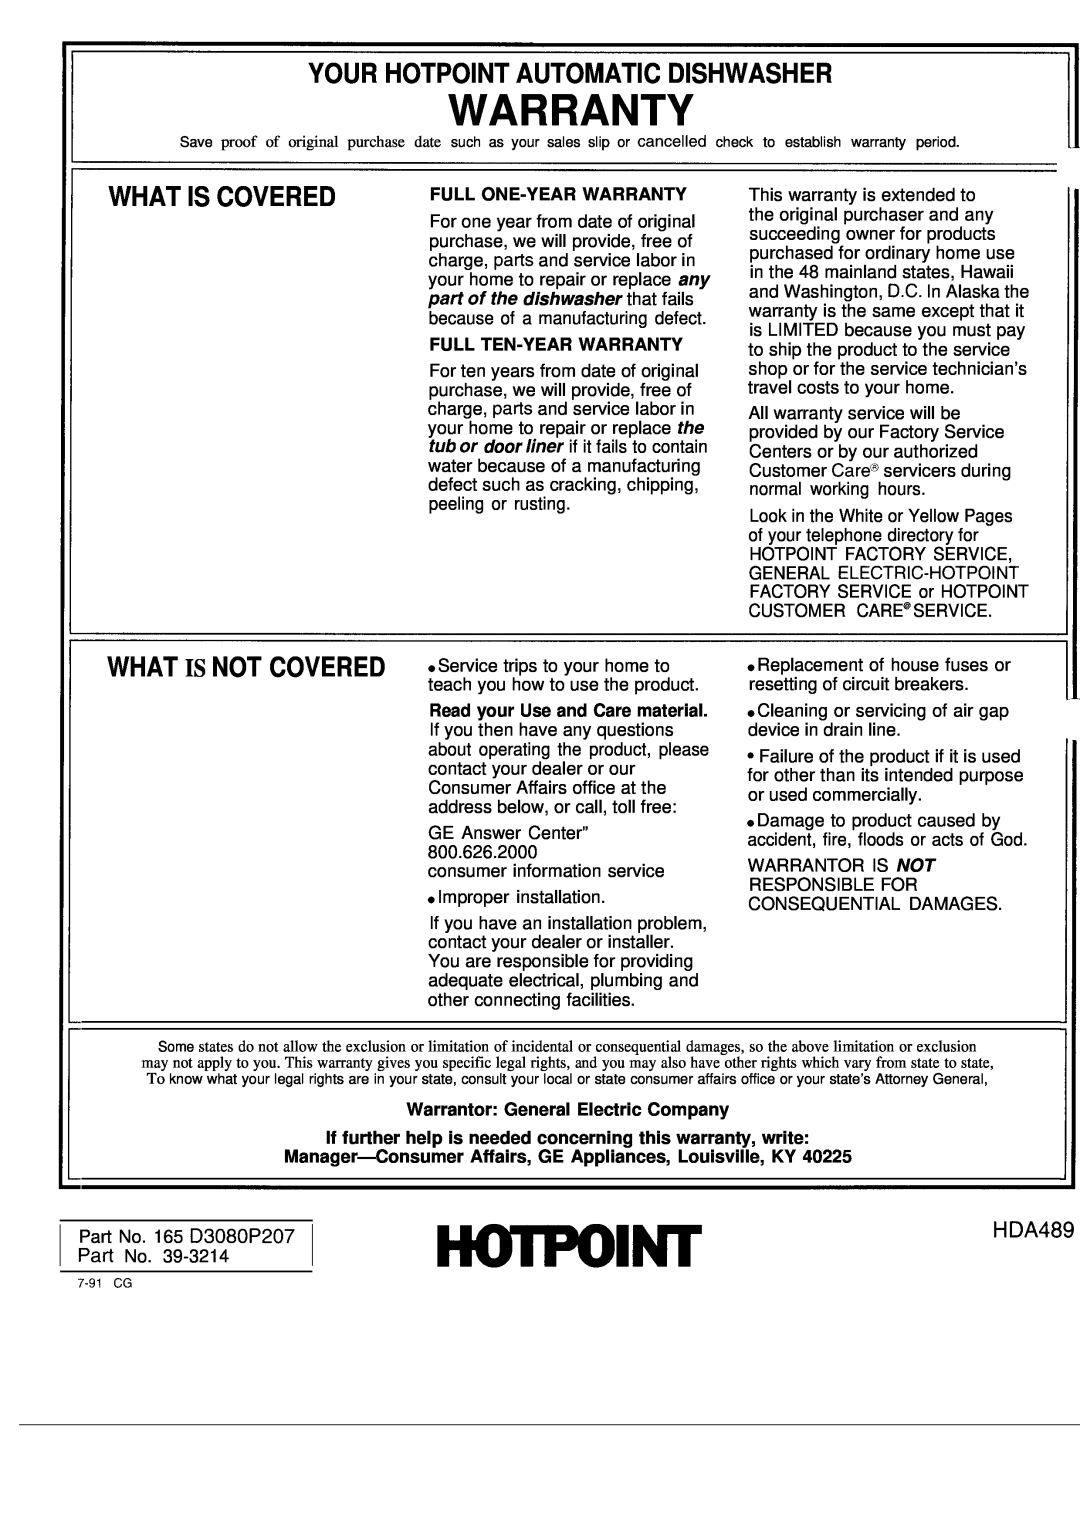 Hotpoint HDA489 Warranty, Your Hotpoint Automatic Dishwasher, What Is Covered, What Is Not Covered, Full One-Yearwarranty 